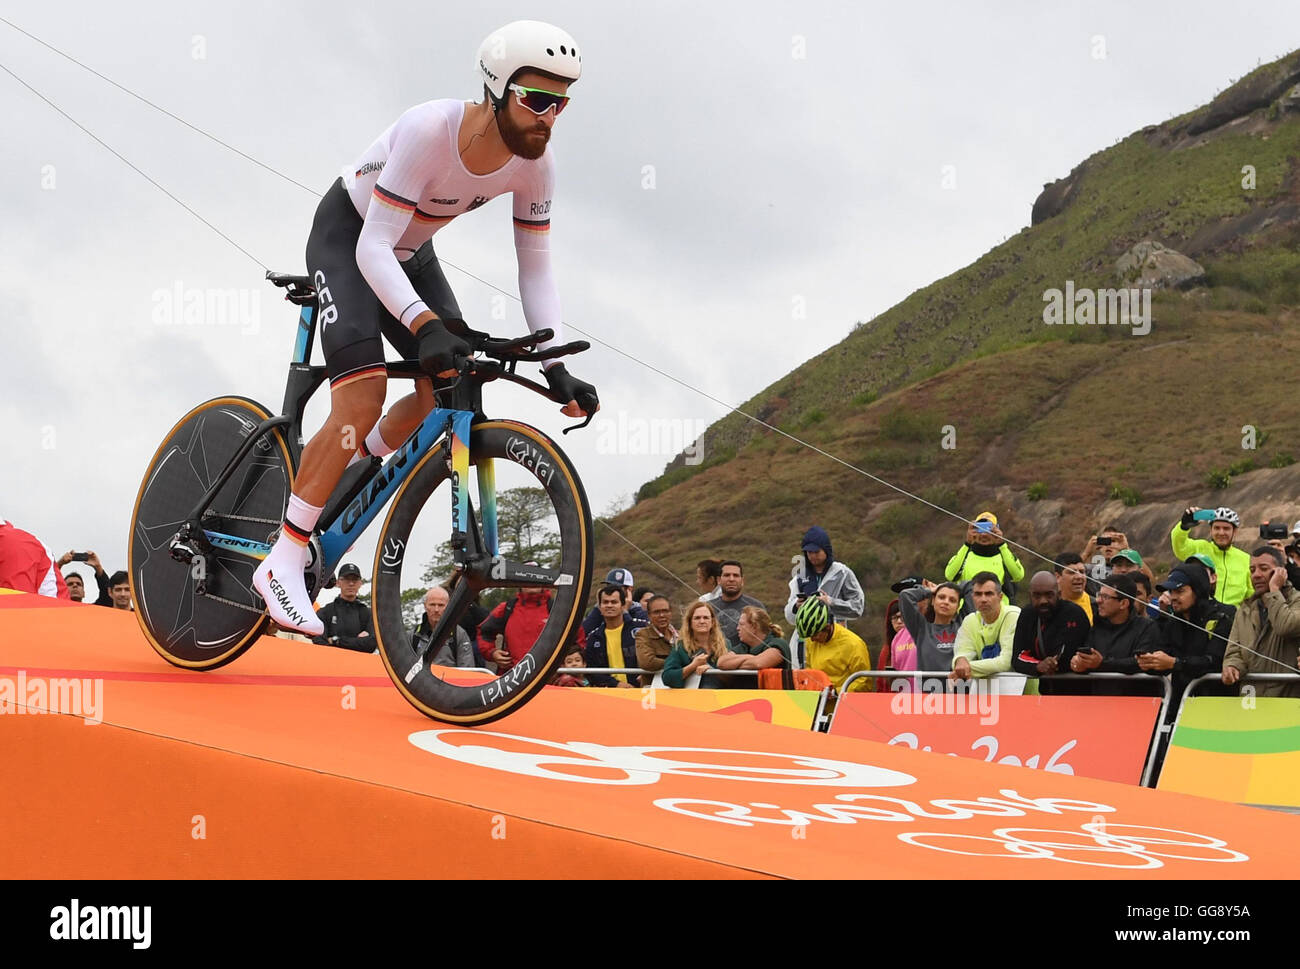 Rio de Janeiro, Brazil. 10th Aug, 2016. Simon Geschke of Germany at the start of the men's Individual Time Trial of the Rio 2016 Olympic Games Road Cycling events at Pontal in Rio de Janeiro, Brazil, 10 August 2016. Photo: Sebastian Kahnert/dpa/Alamy Live News Stock Photo